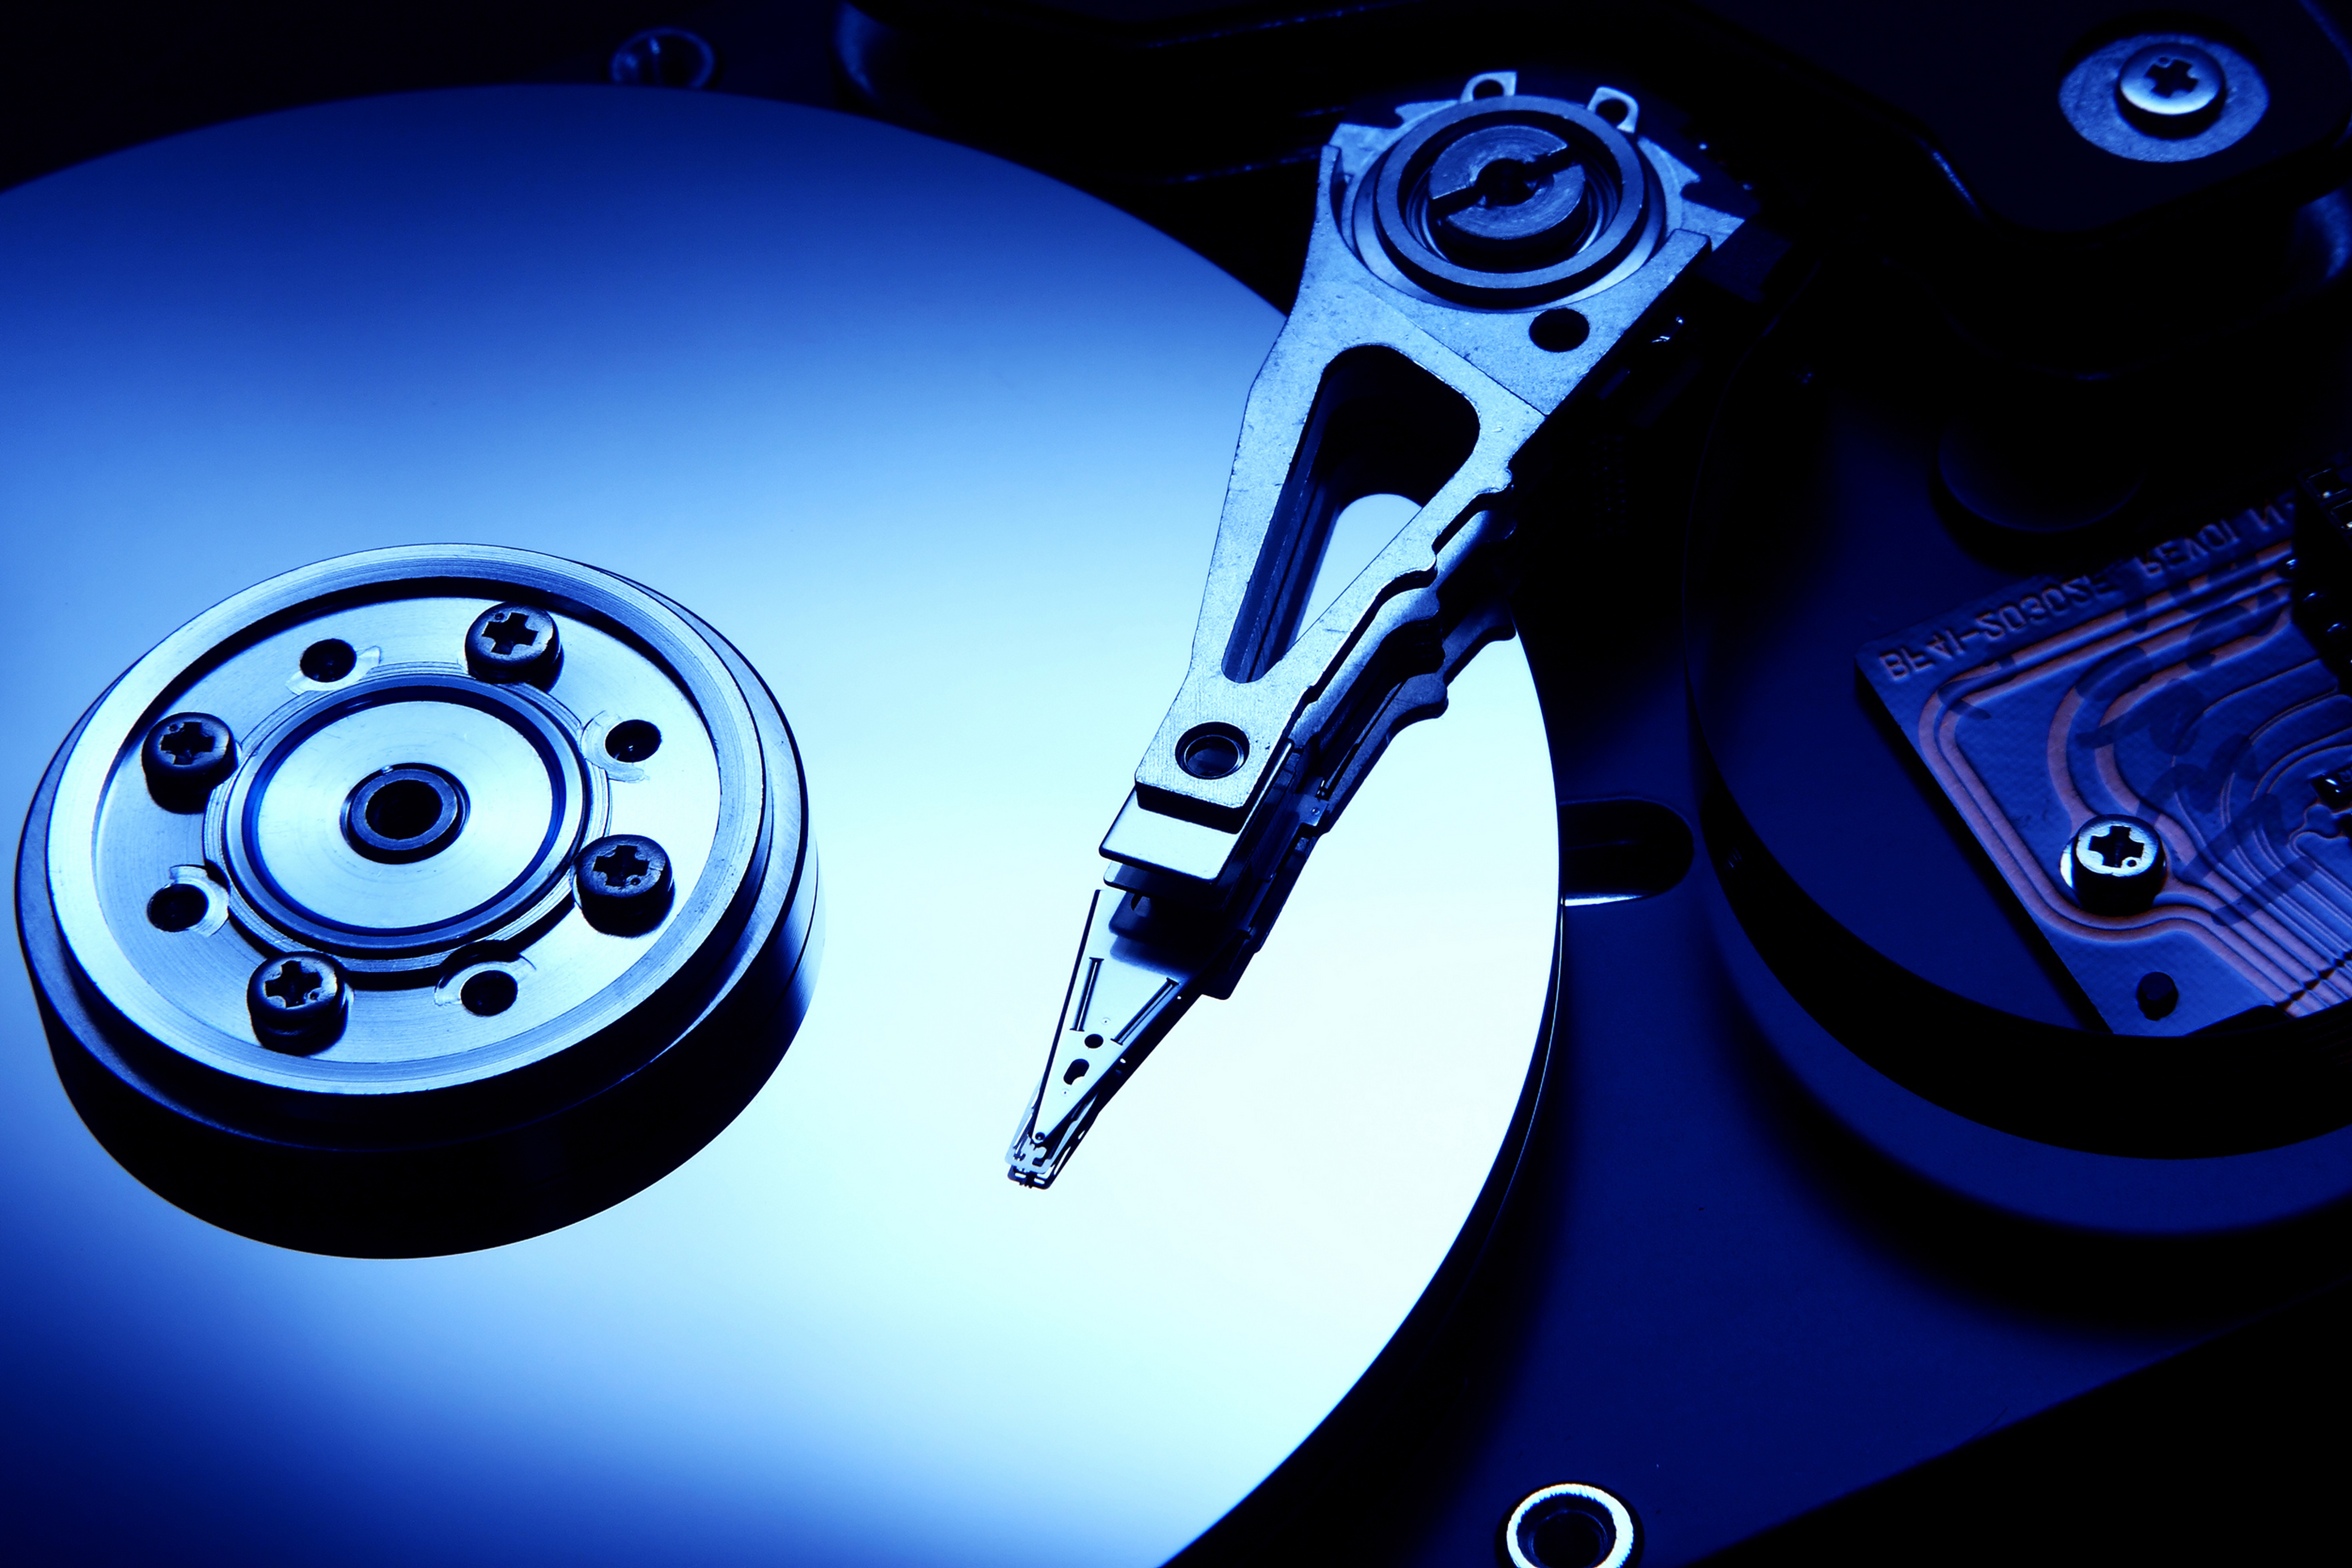 hard wallpaper,data storage device,hard disk drive,technology,electronic device,computer component